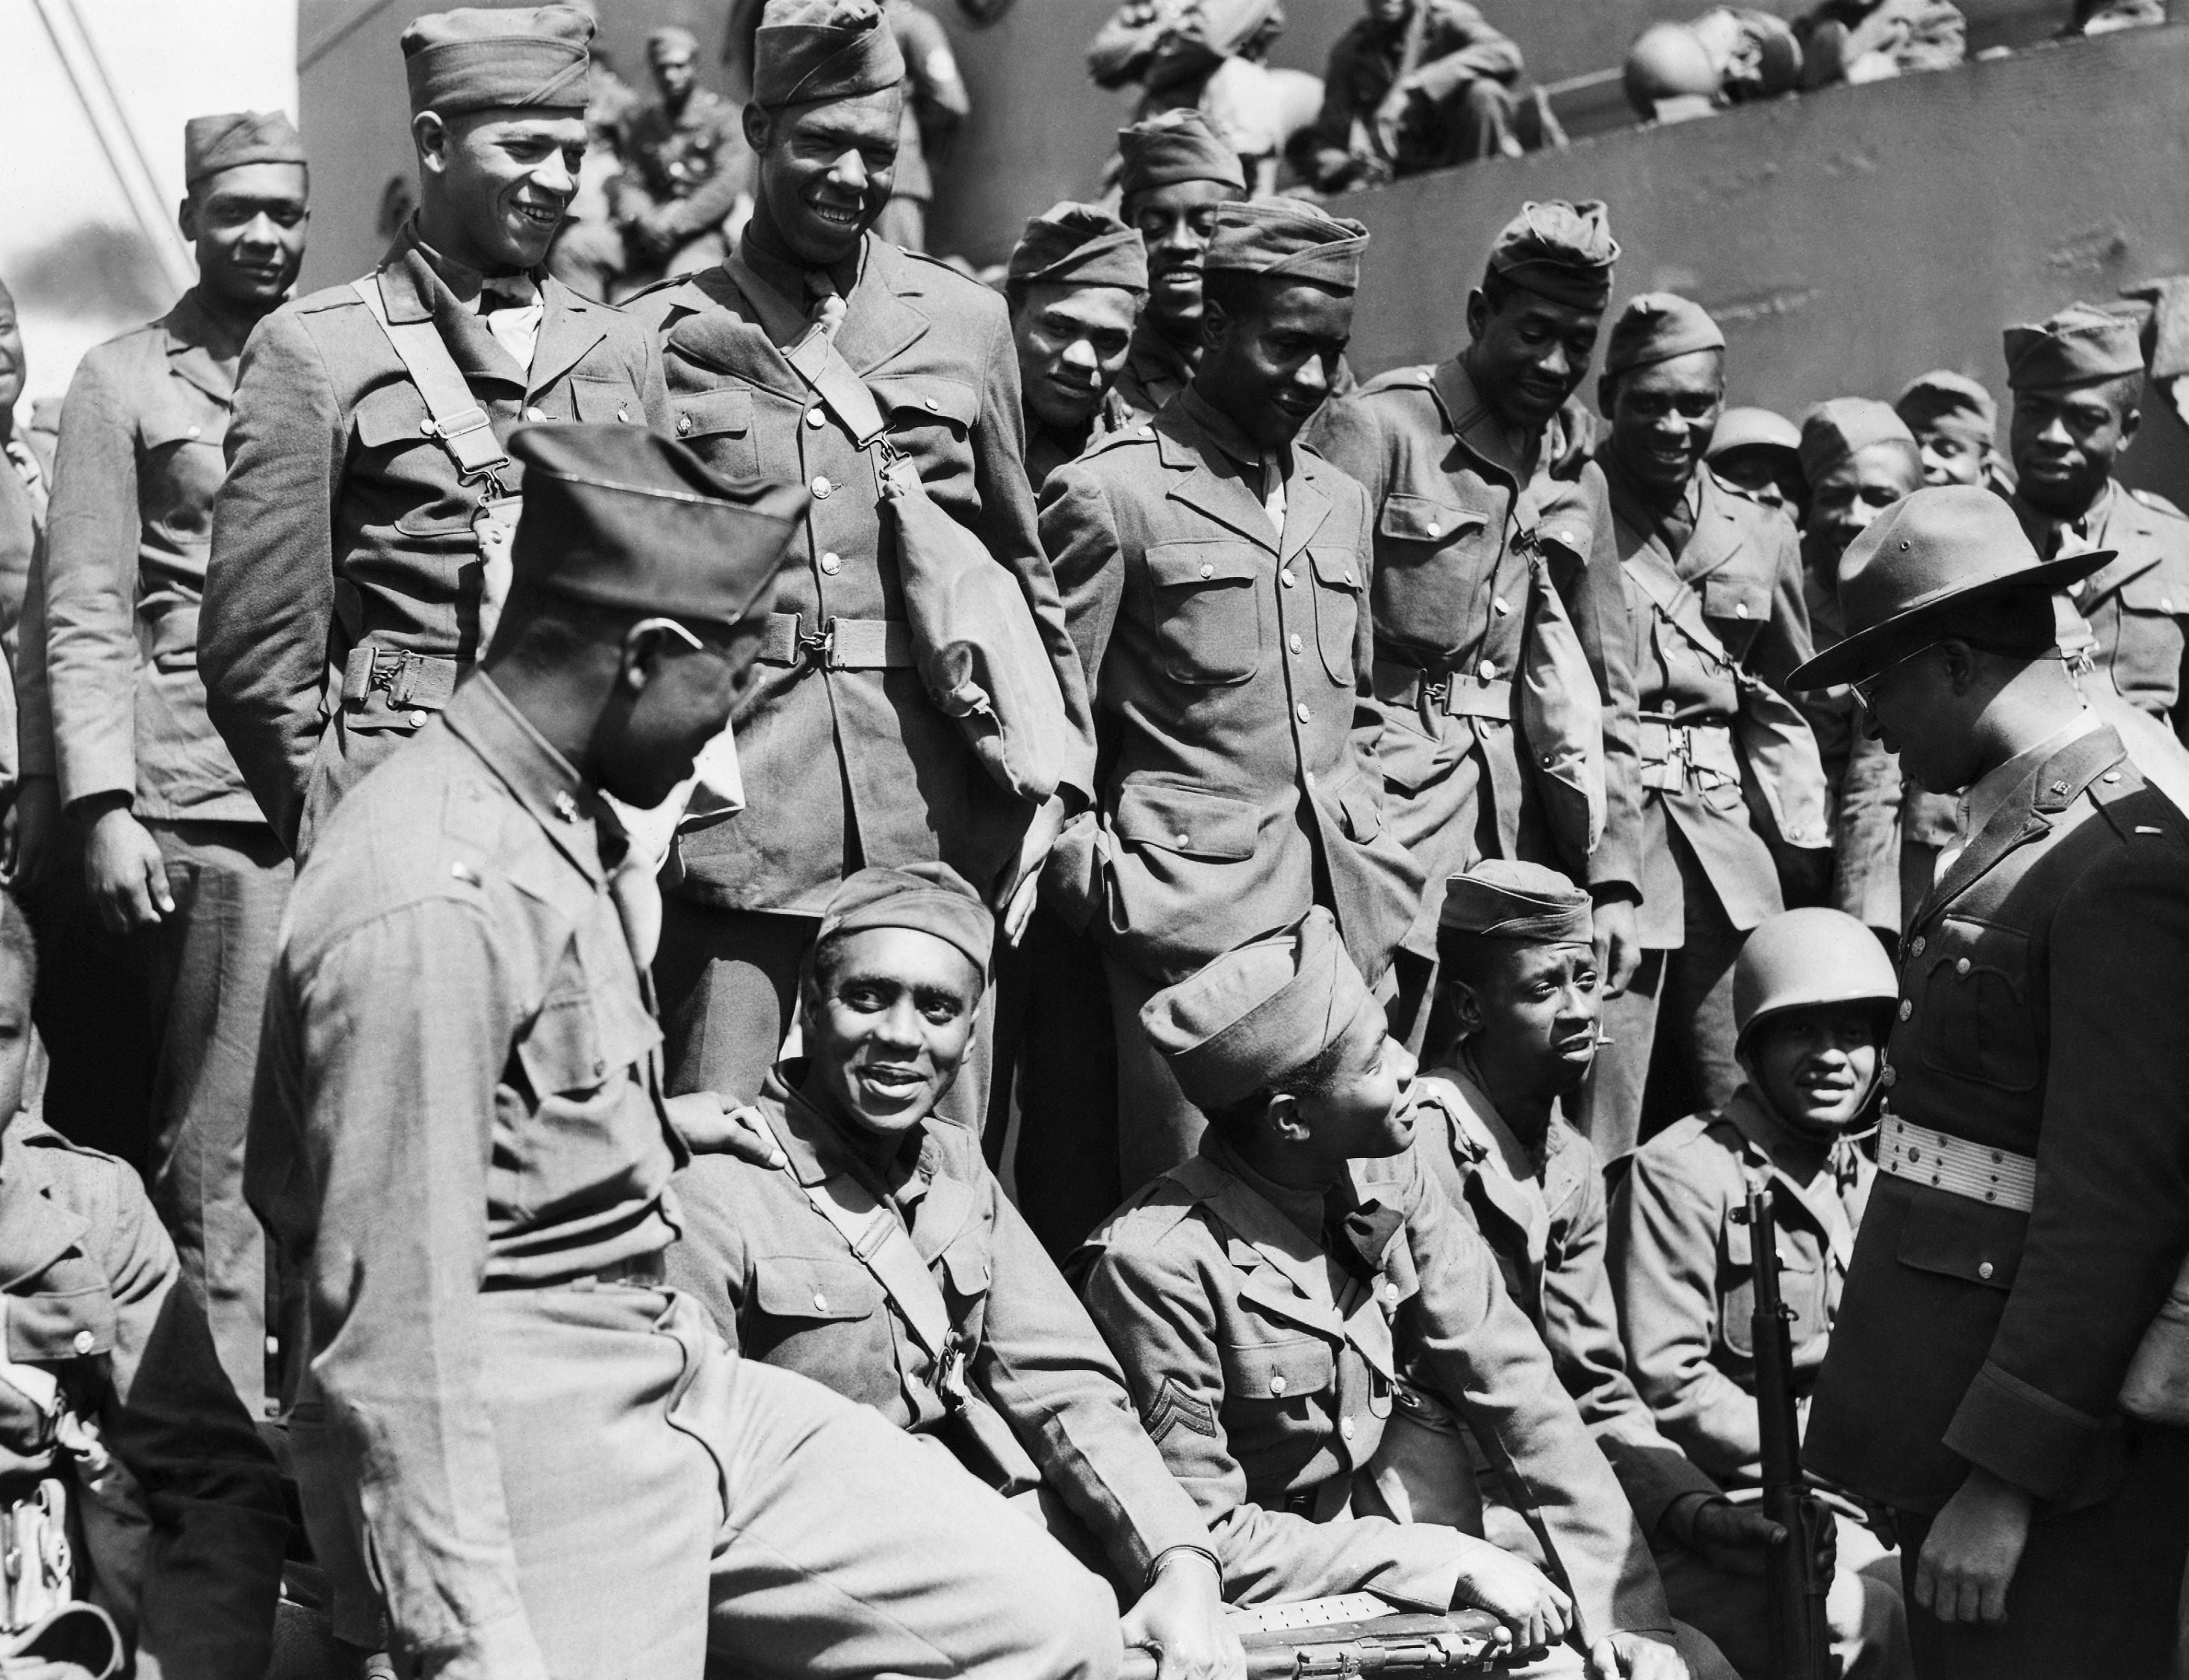 African-American GIs of WWII: Fighting for democracy abroad and at